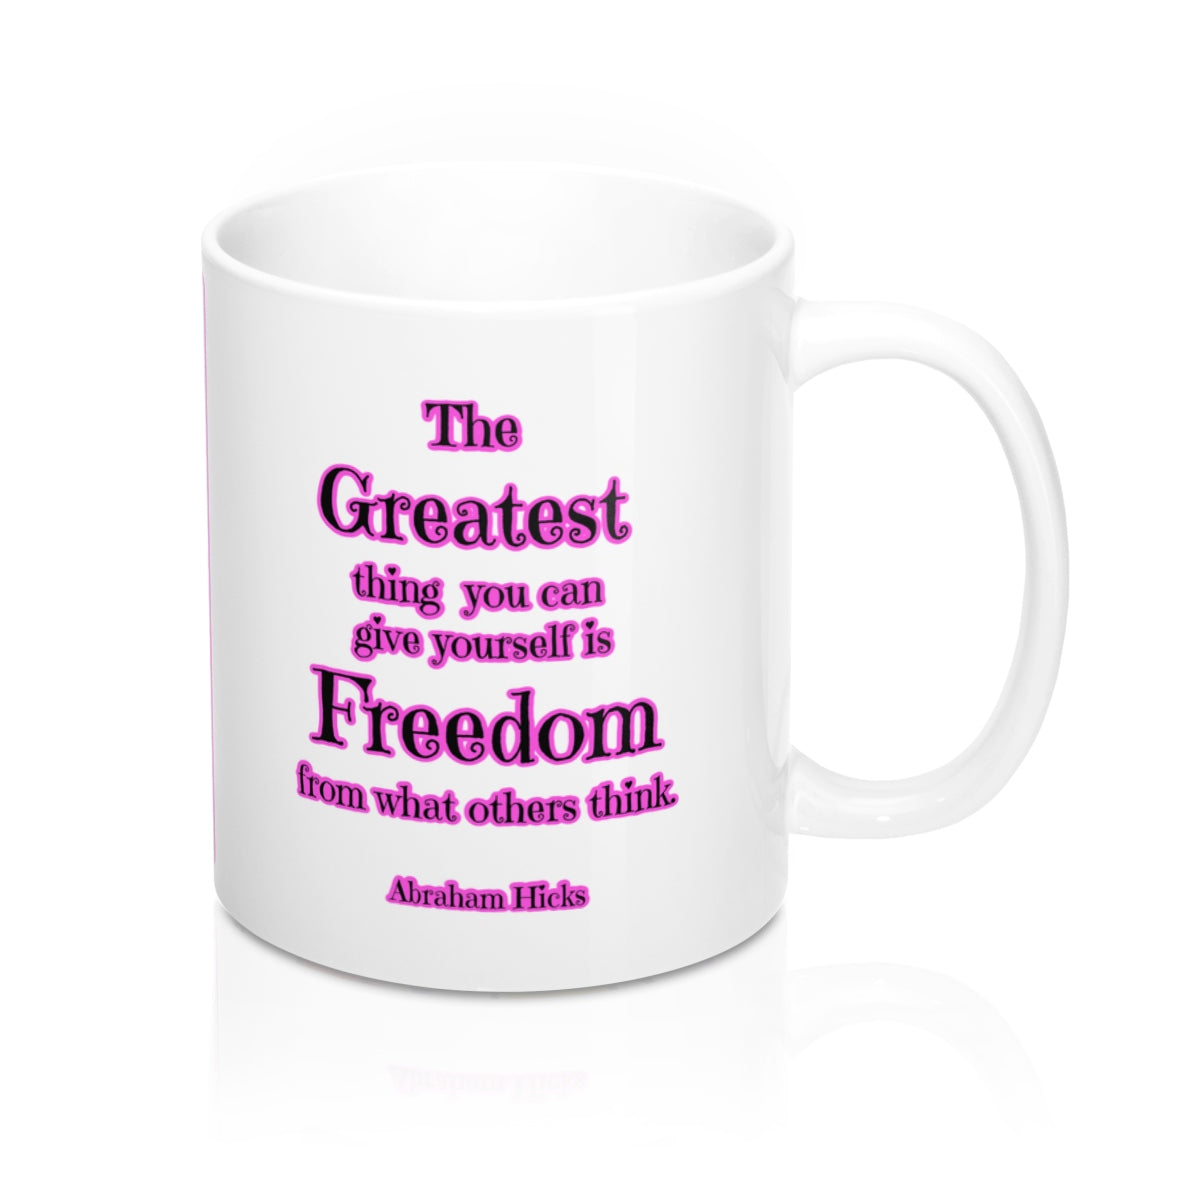 The Greatest Thing You Can Give Yourself is FREEDOM From What Others Think.  Law Of Attraction Abraham Hicks Mug 11oz